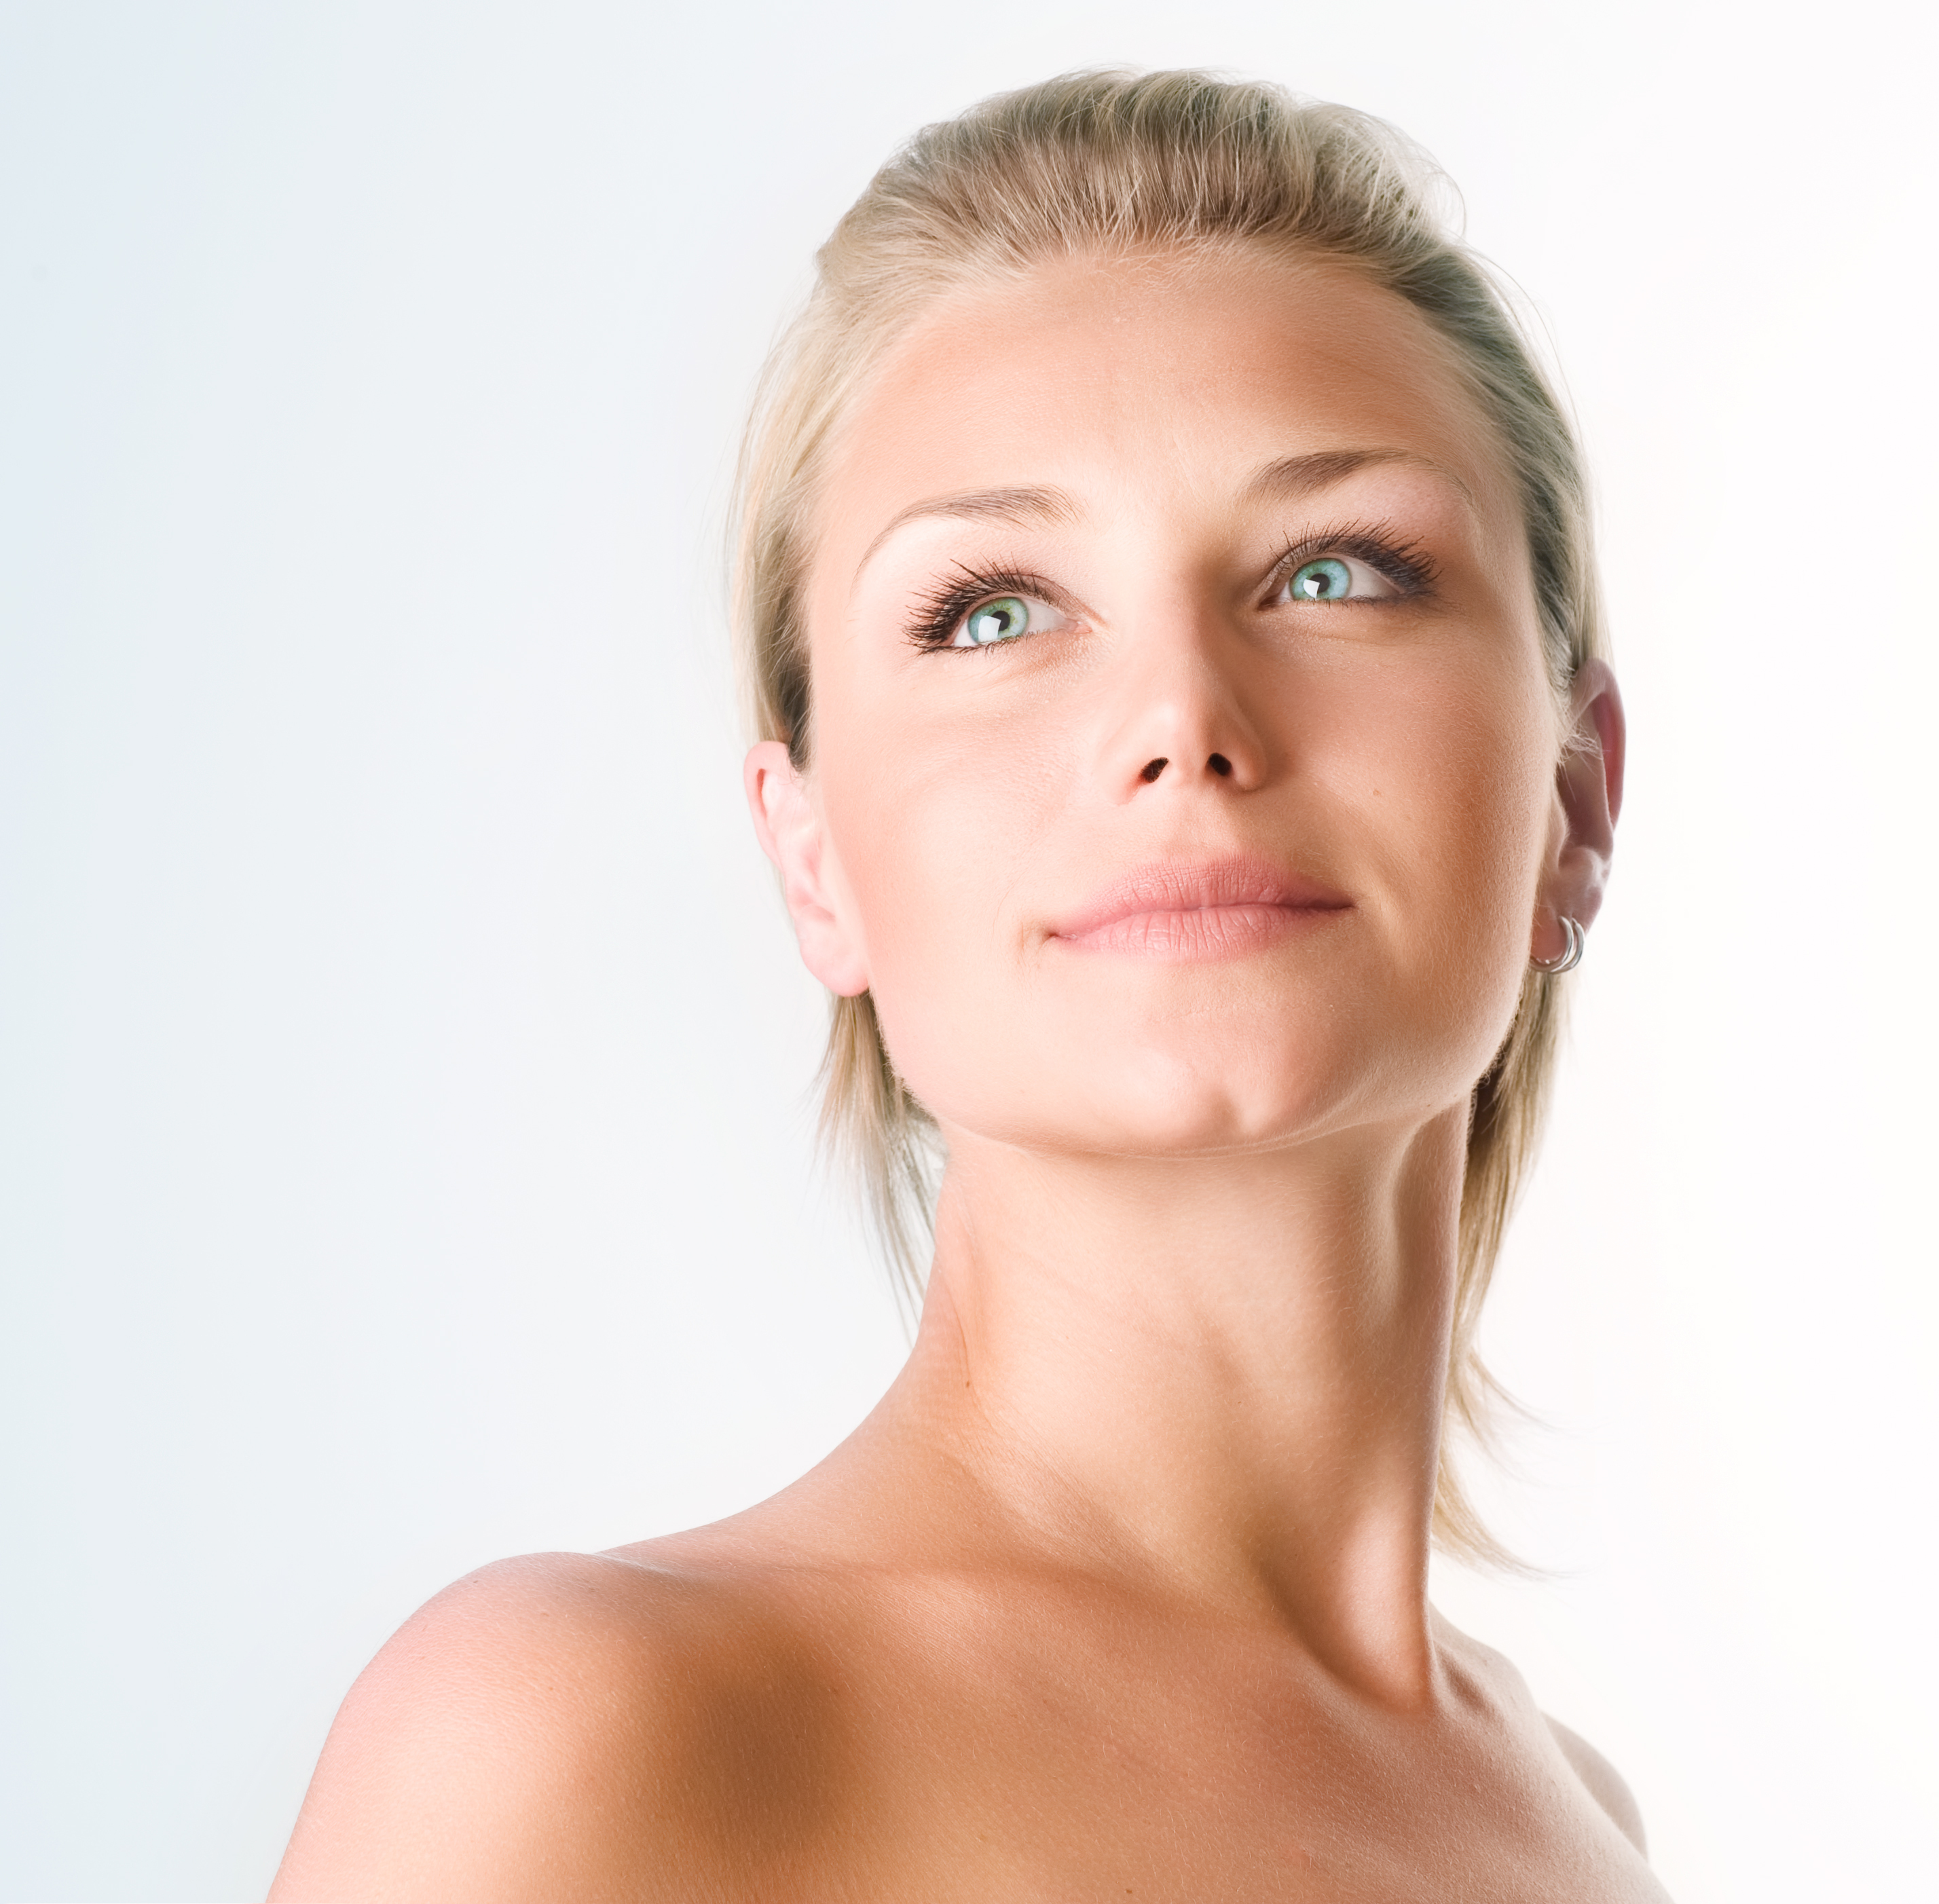 Nose Reshaping Plastic Surgery (Rhinoplasty) - Types of Lifts, Cost, Recovery & Results